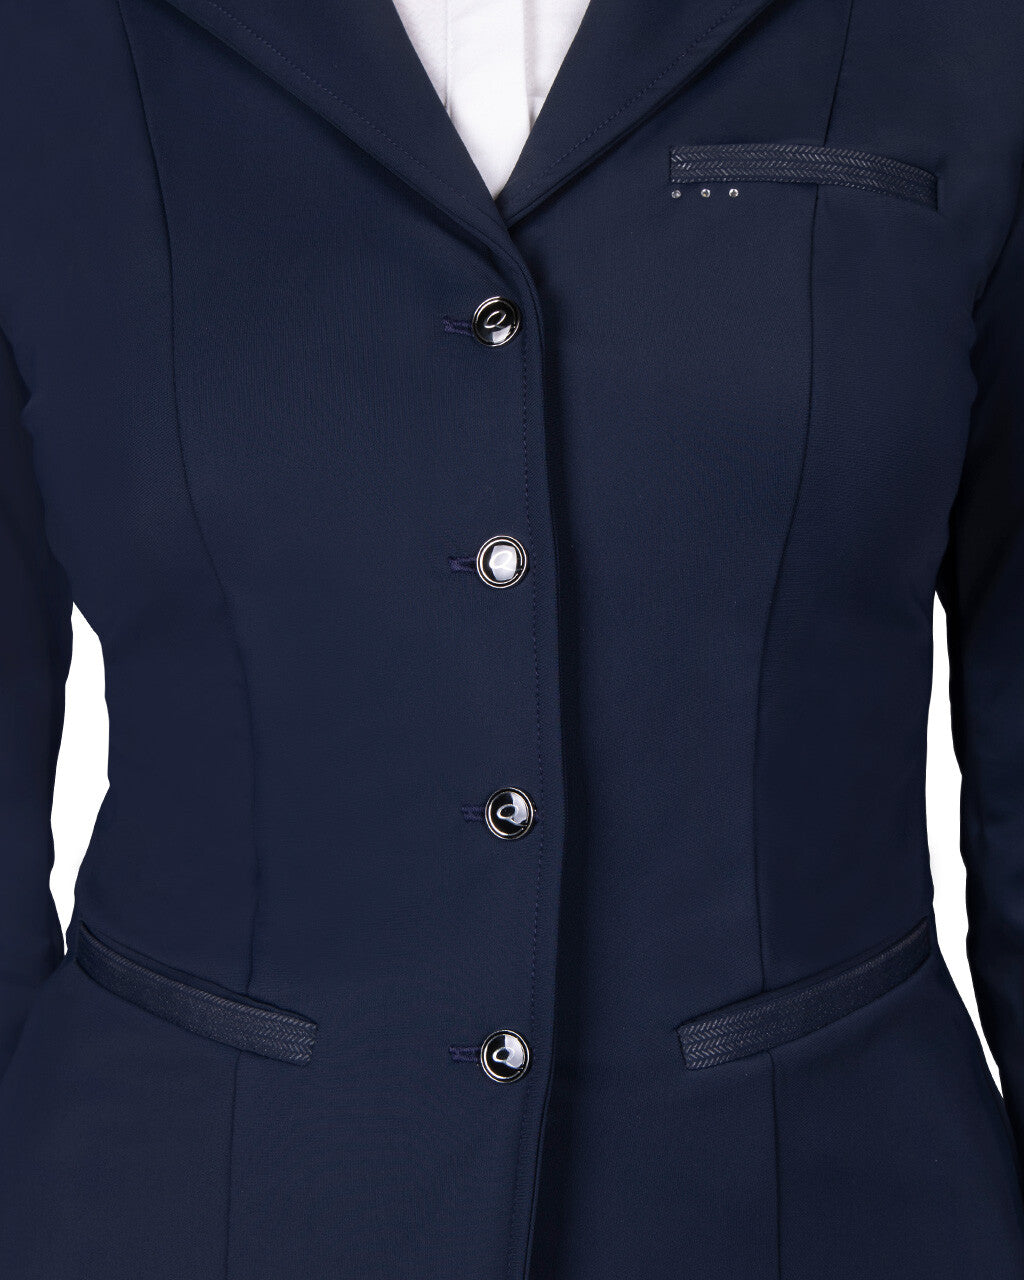 QHP Competition Jacket Kae - Navy